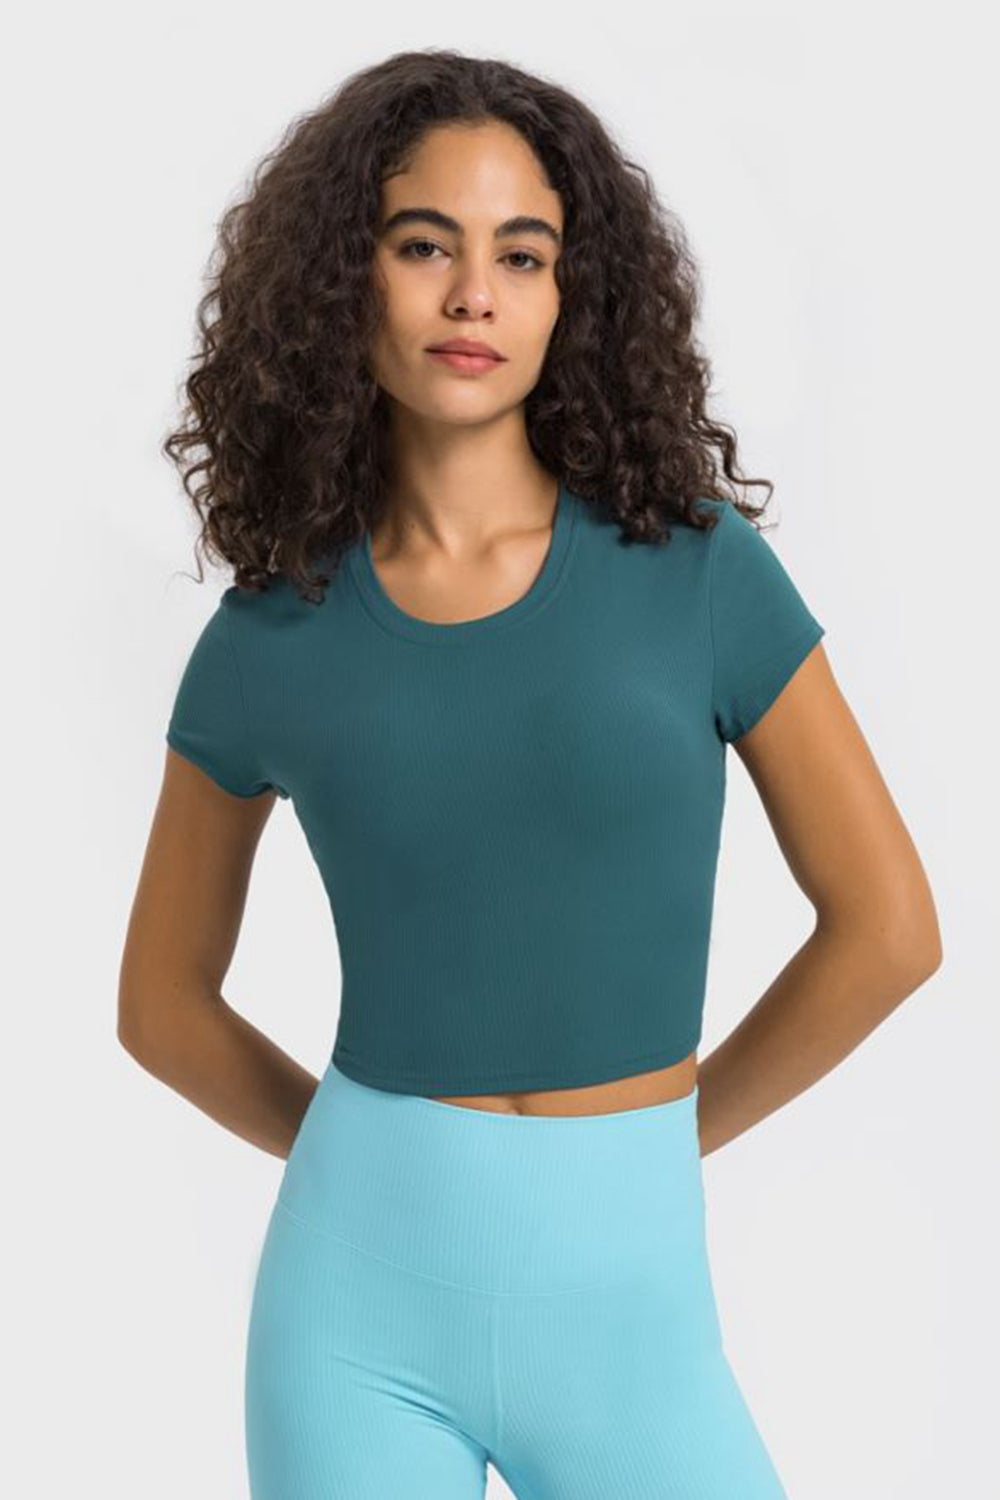 Round Neck Short Sleeve Cropped Sports T-Shirt  Trendsi Teal 4 